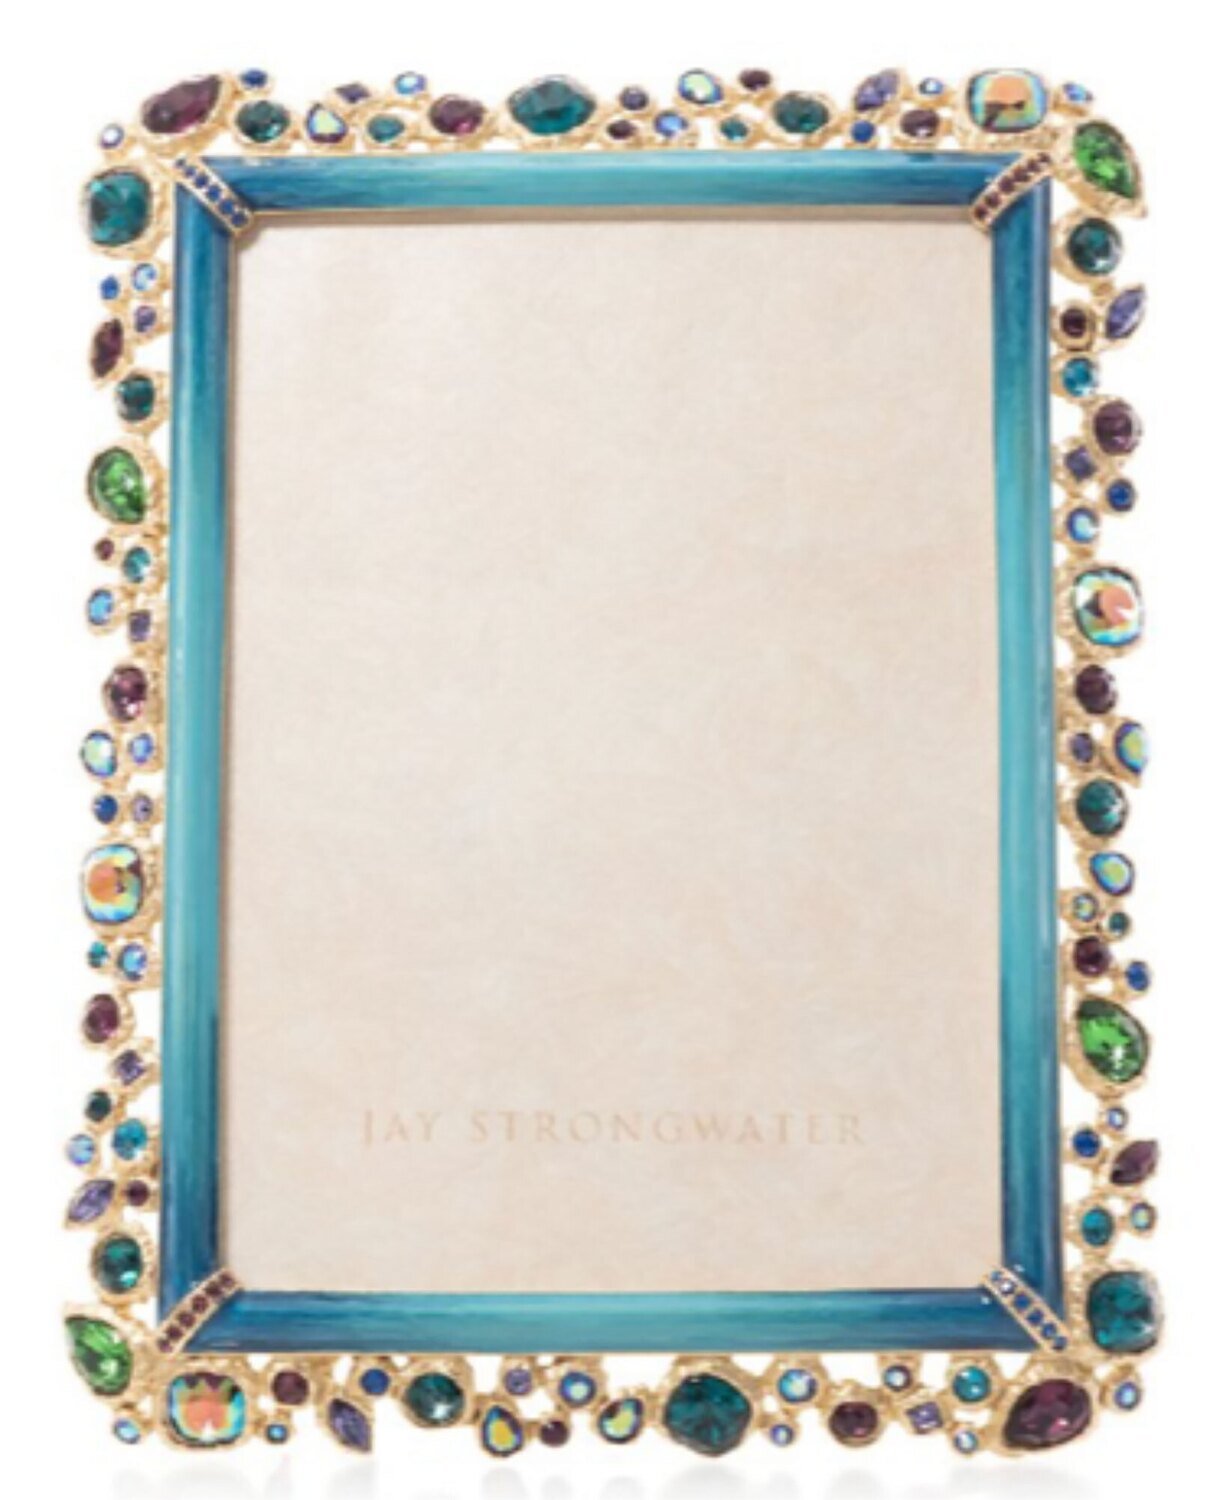 Jay Strongwater Leslie Bejeweled 5" x 7" Picture Frame SPF5844-208